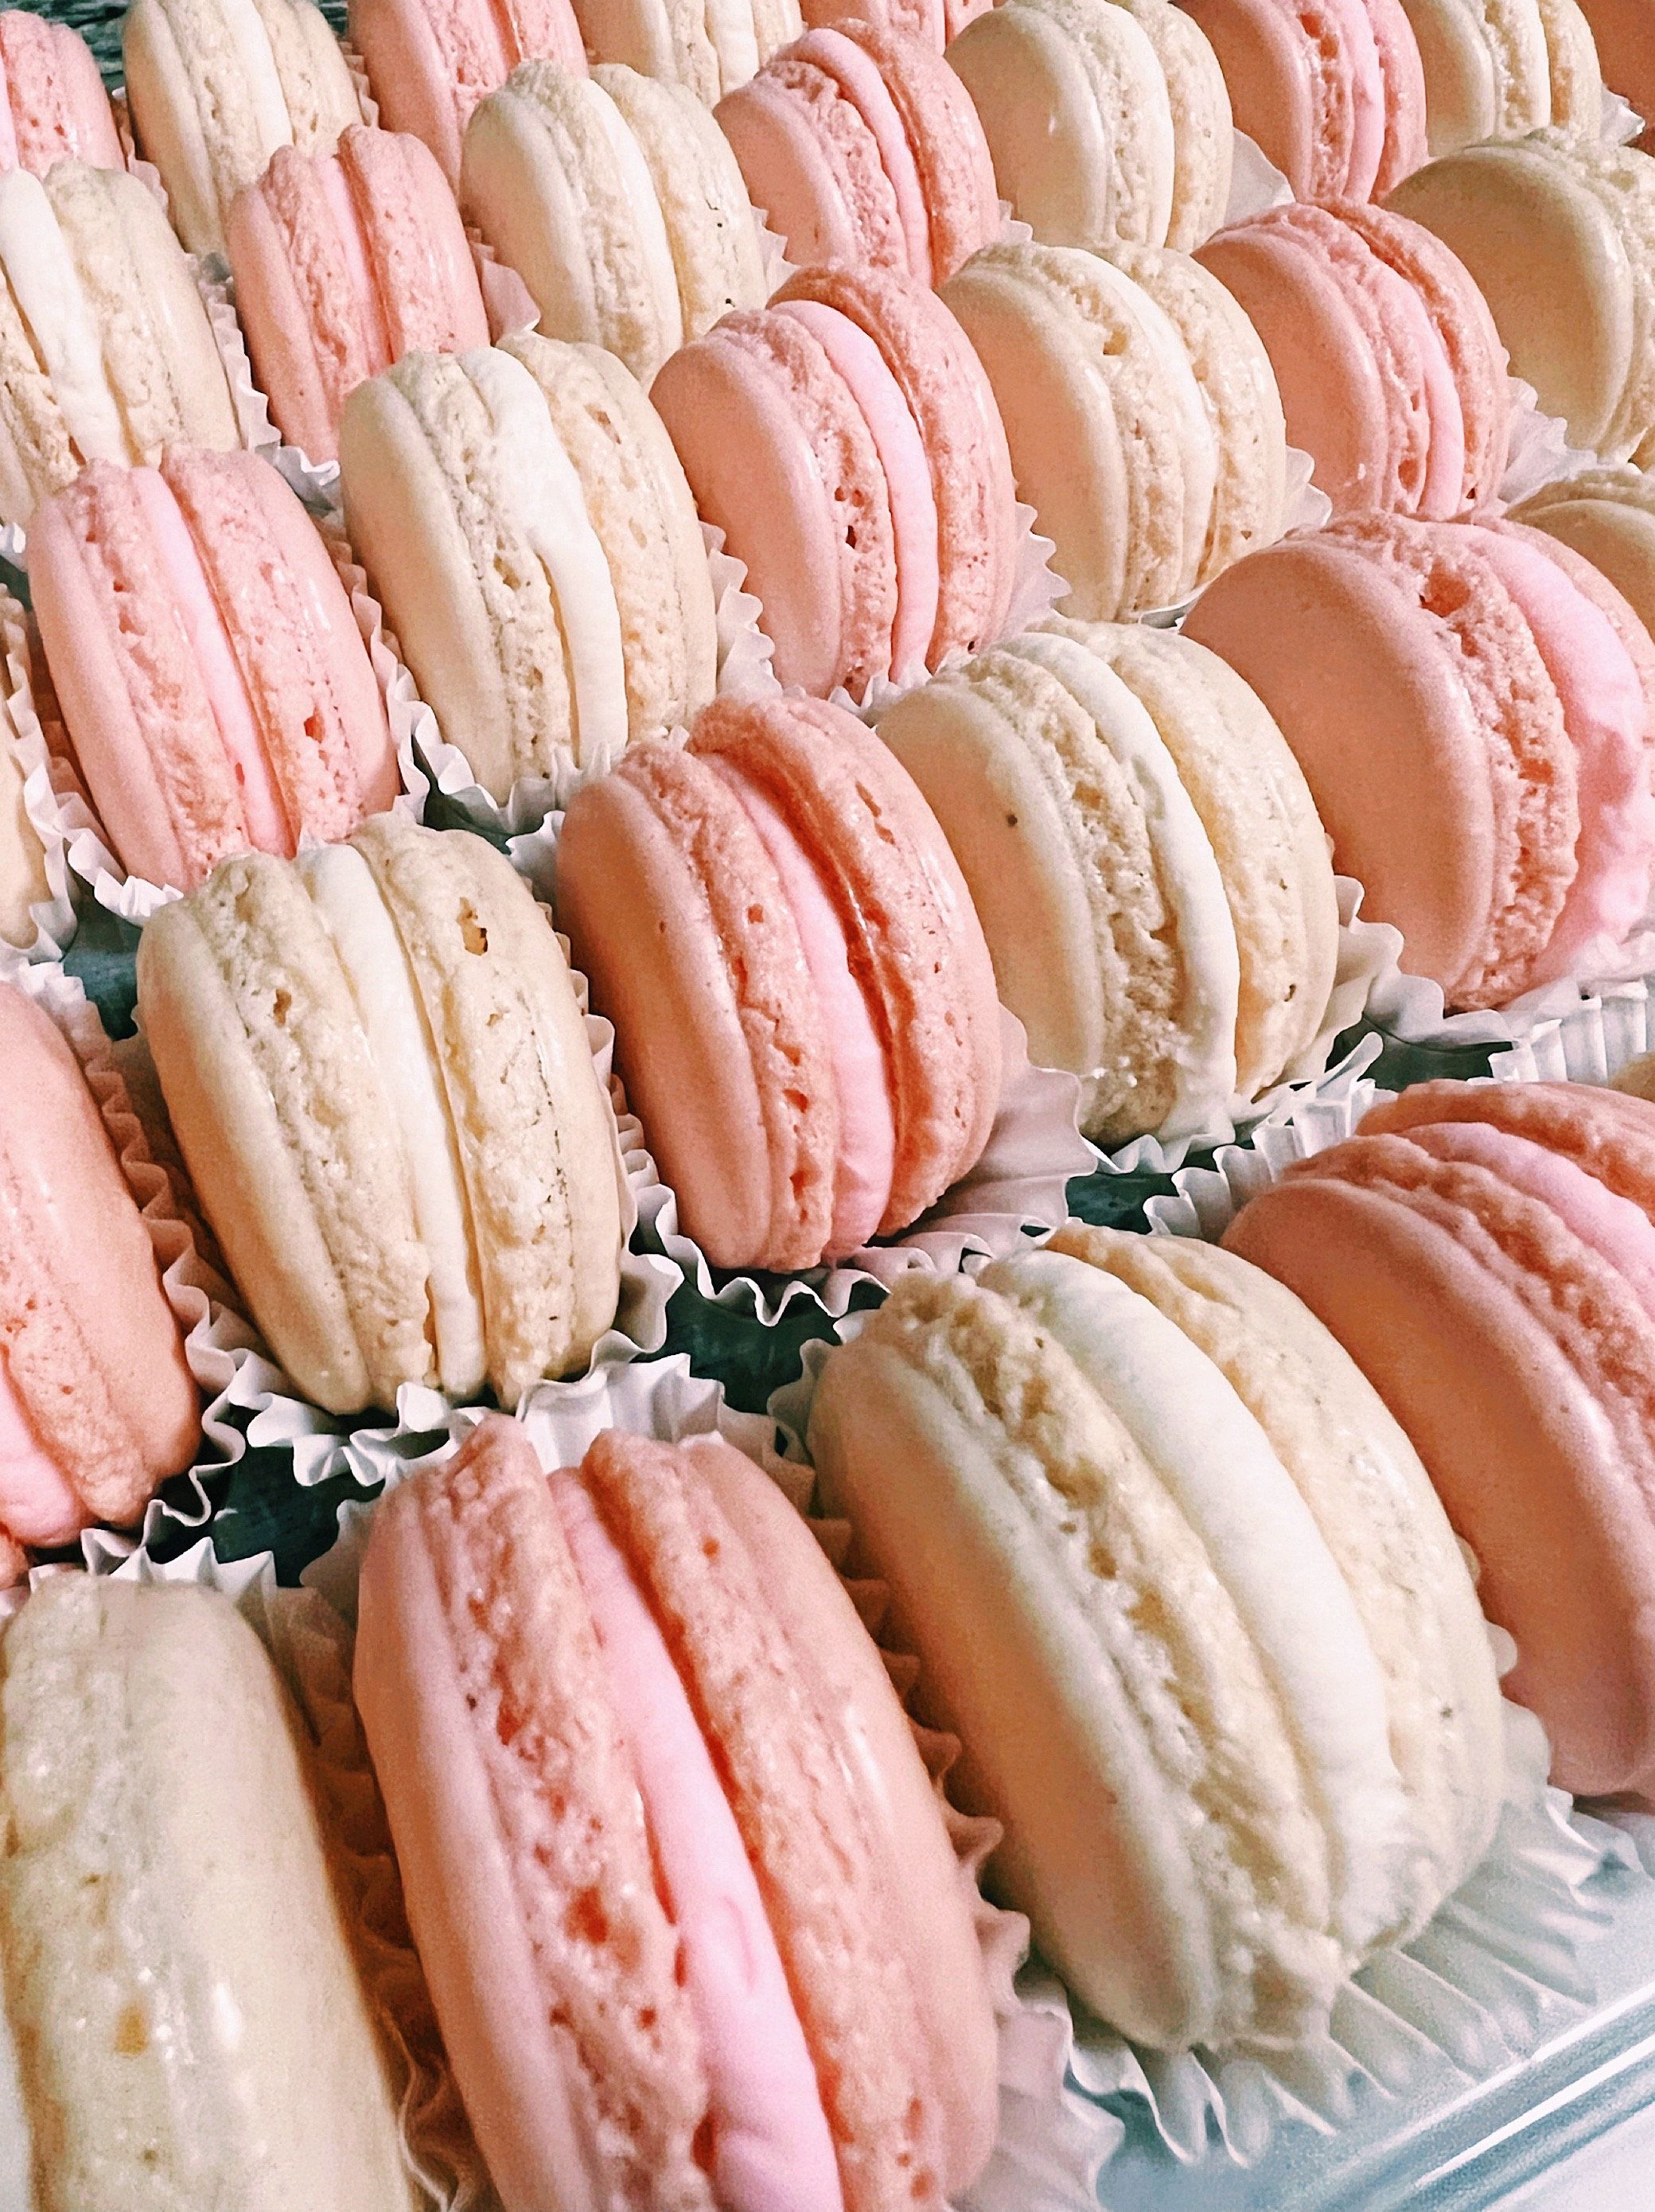 A tray of macarons in shades of pink and white - Macarons